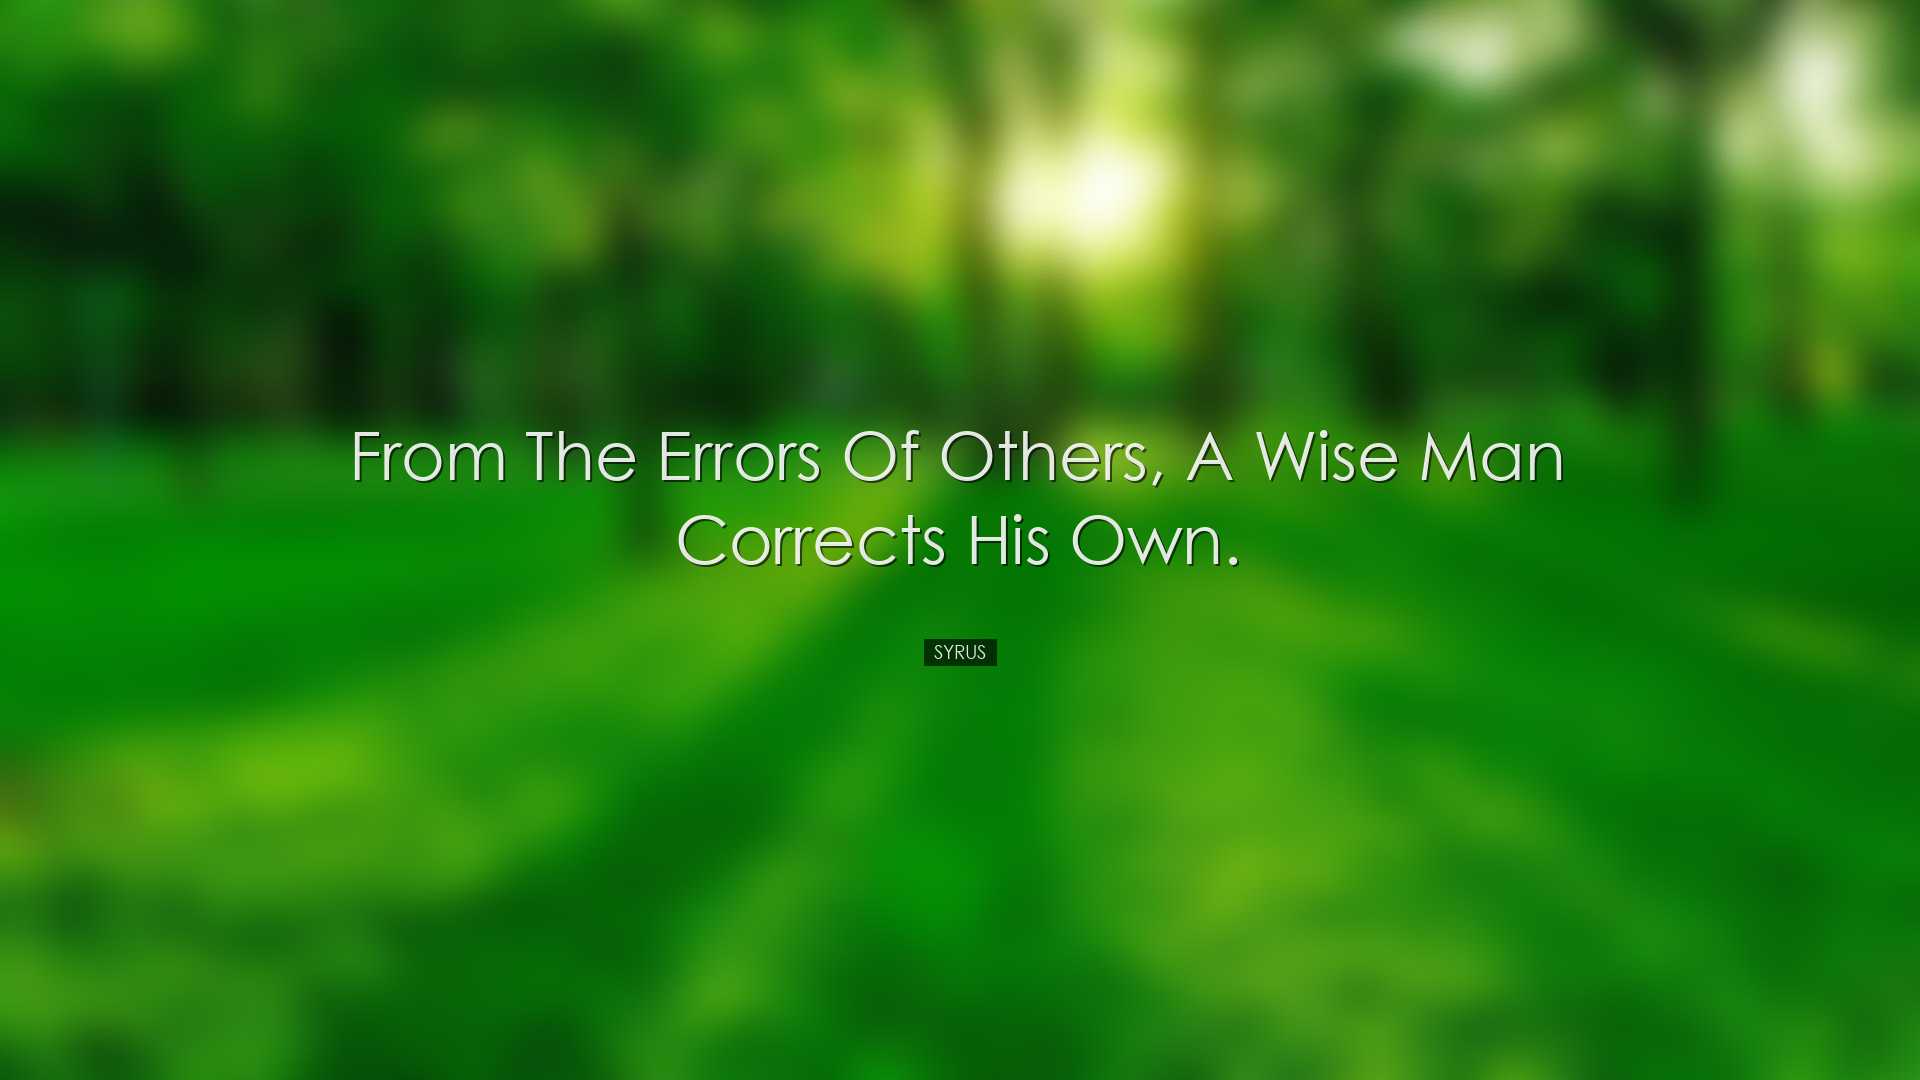 From the errors of others, a wise man corrects his own. - Syrus